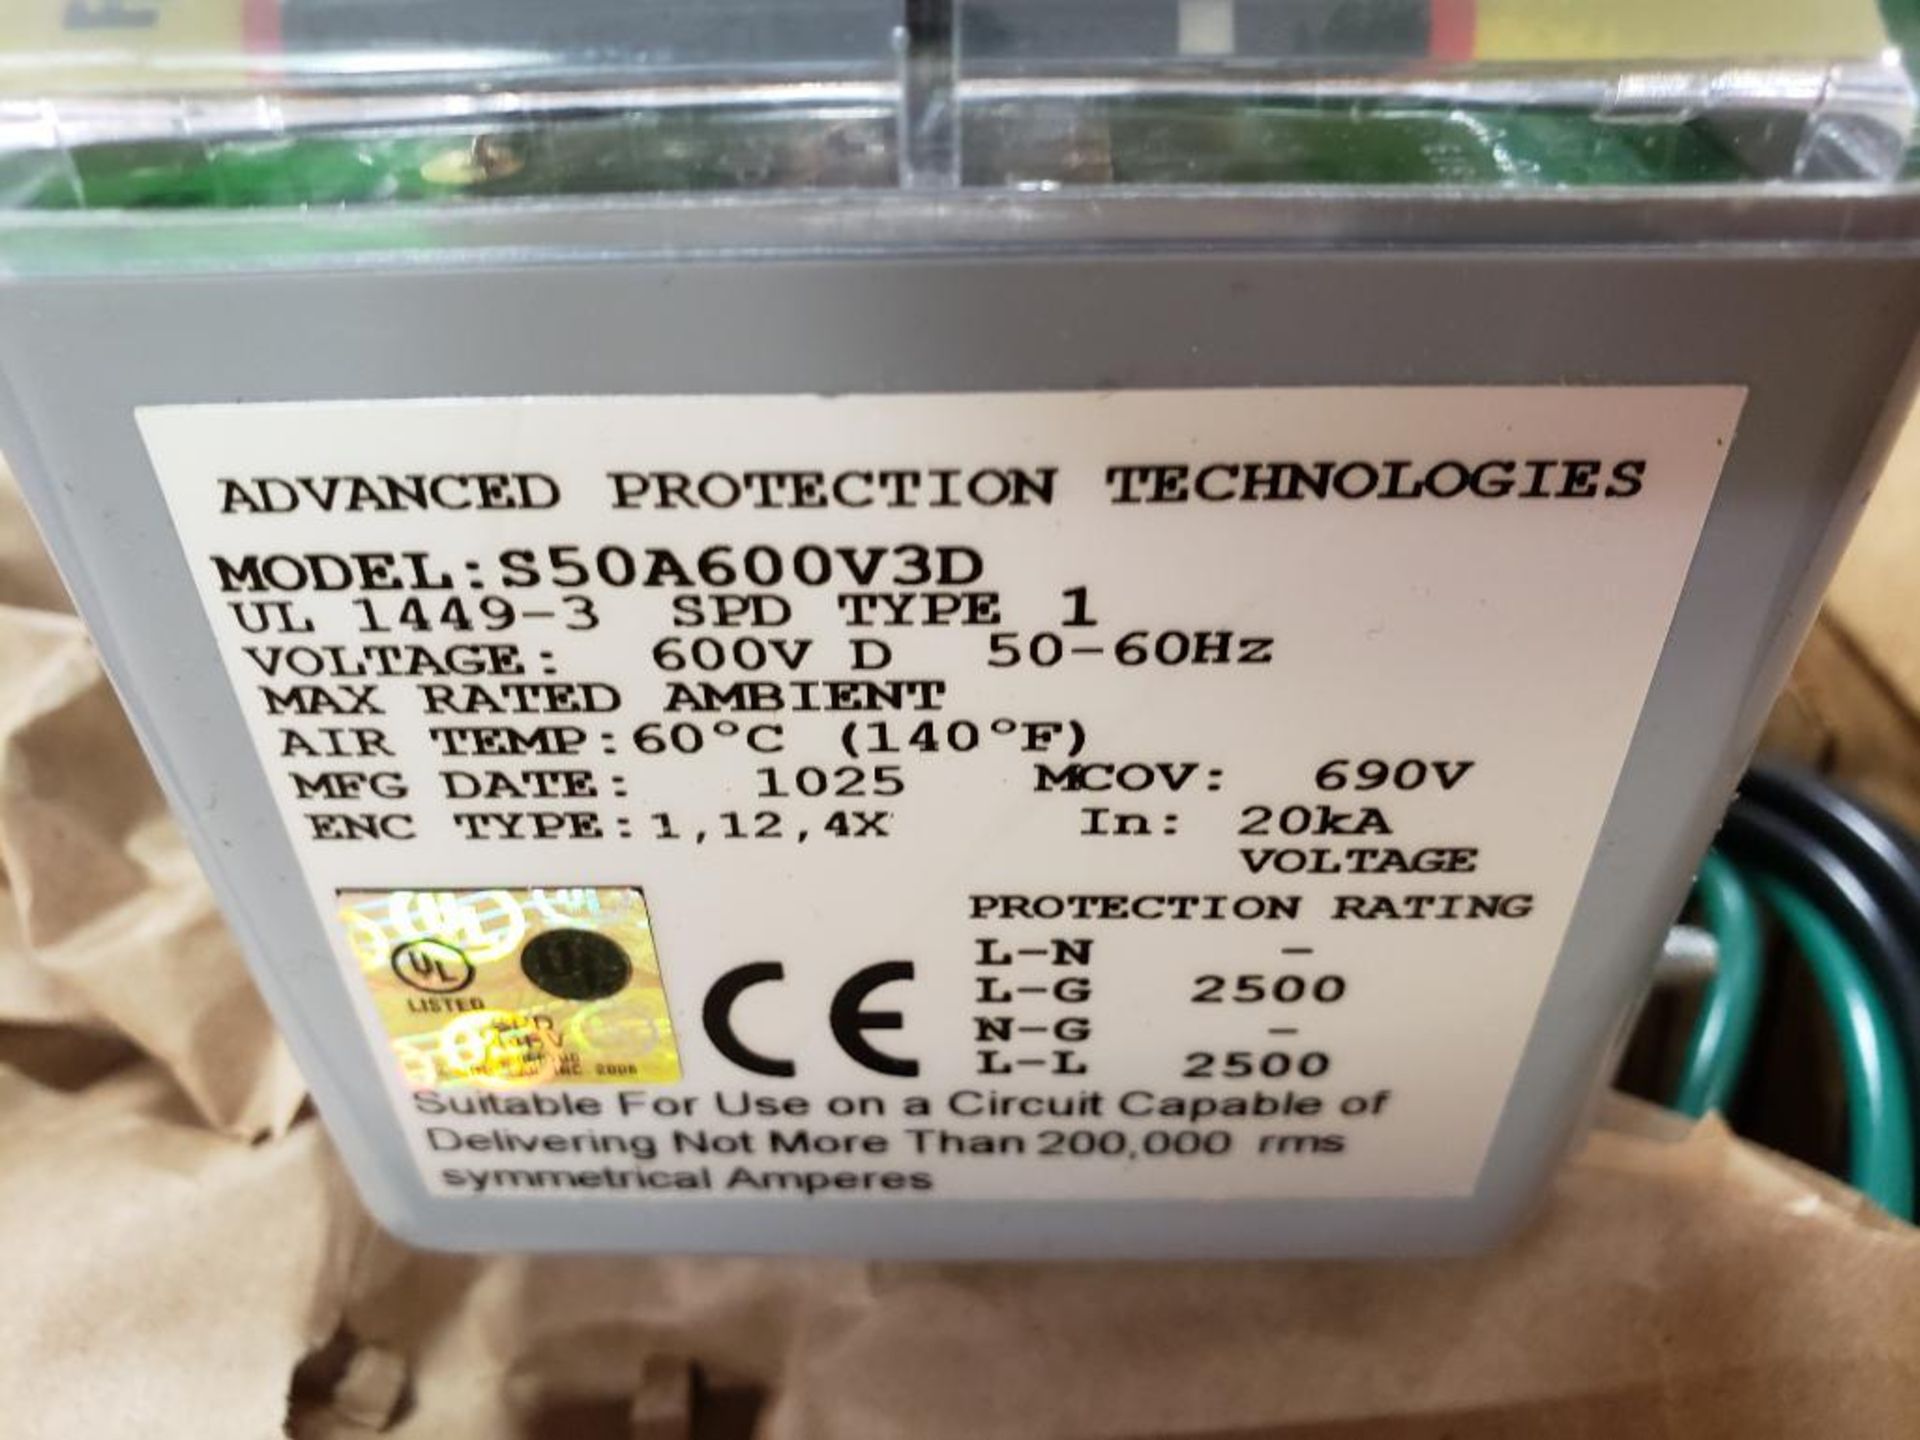 Qty 3 - Advanced Protection Technologies SPDee type 1 surge protective device. Model S50A600V3D. - Image 3 of 3